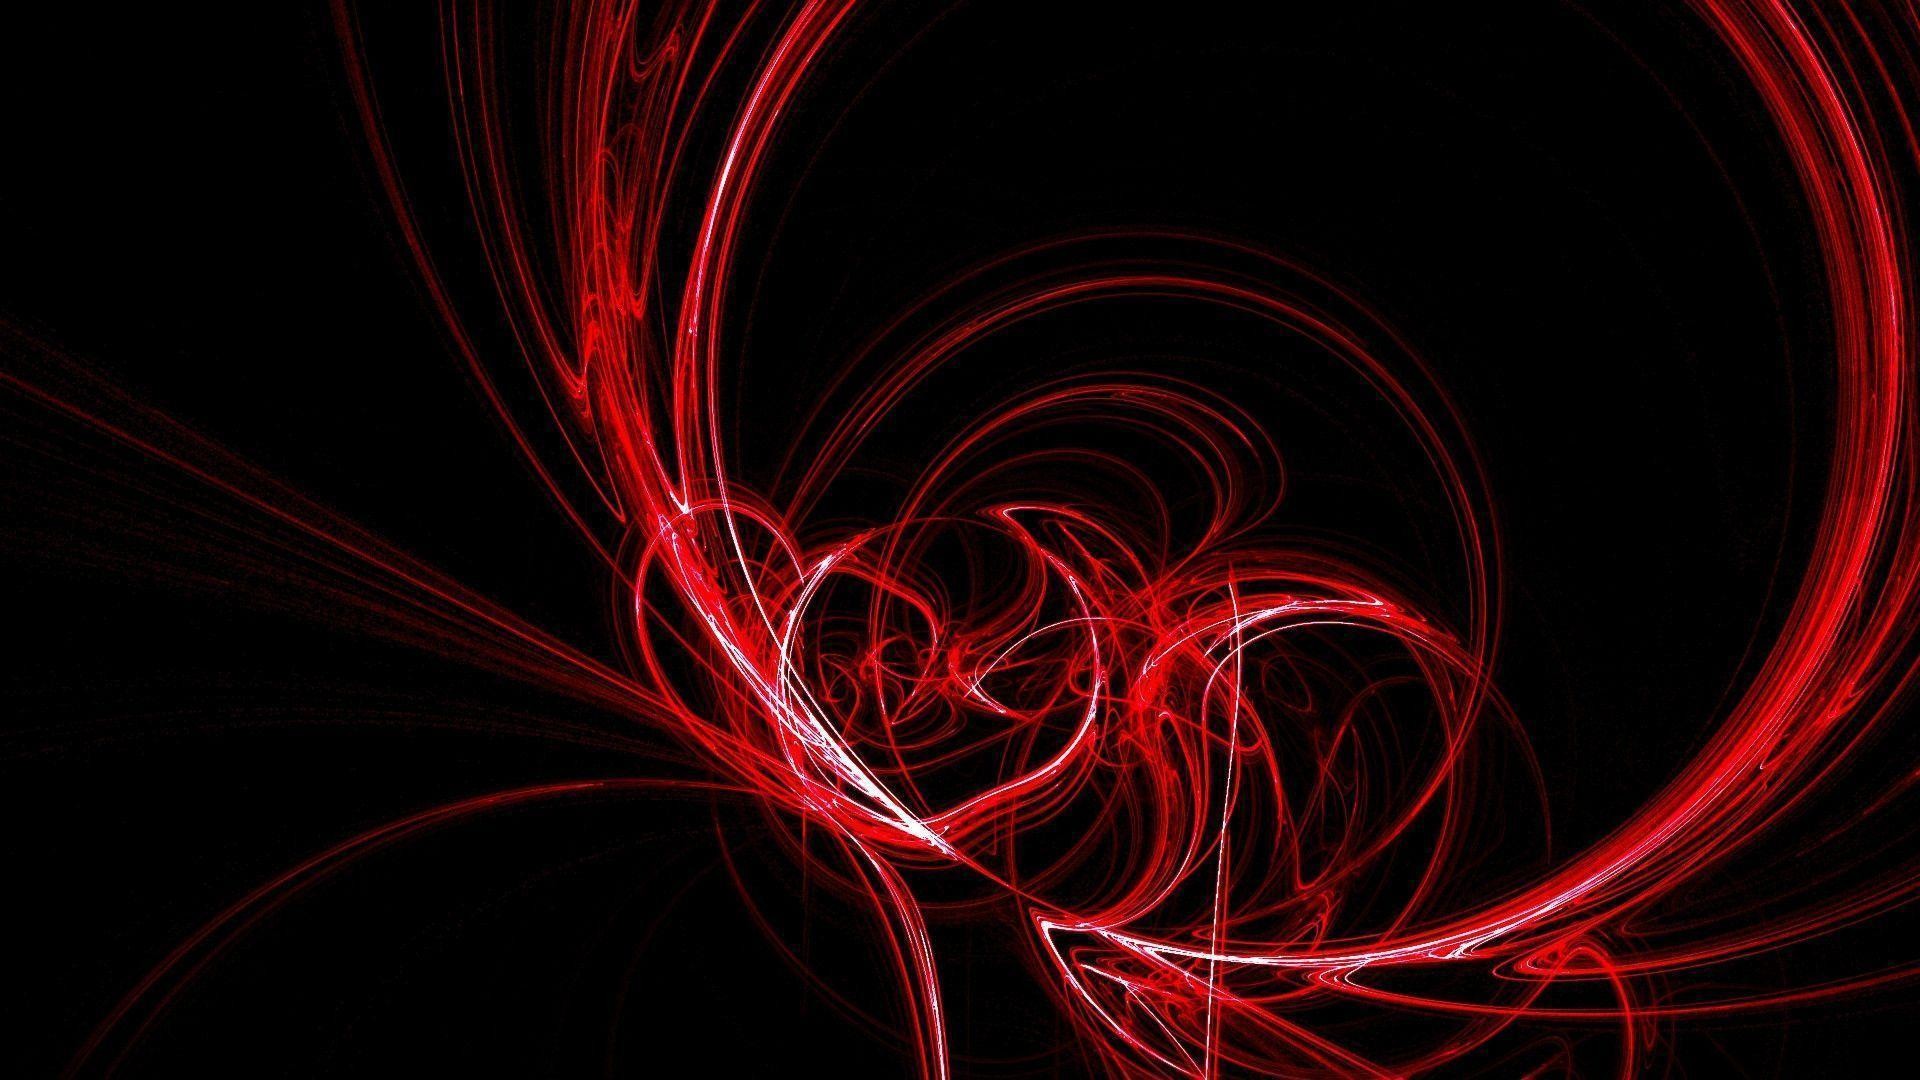 1920x1080 Black And Red Abstract Background 14760 Full HD Wallpaper Desktop .